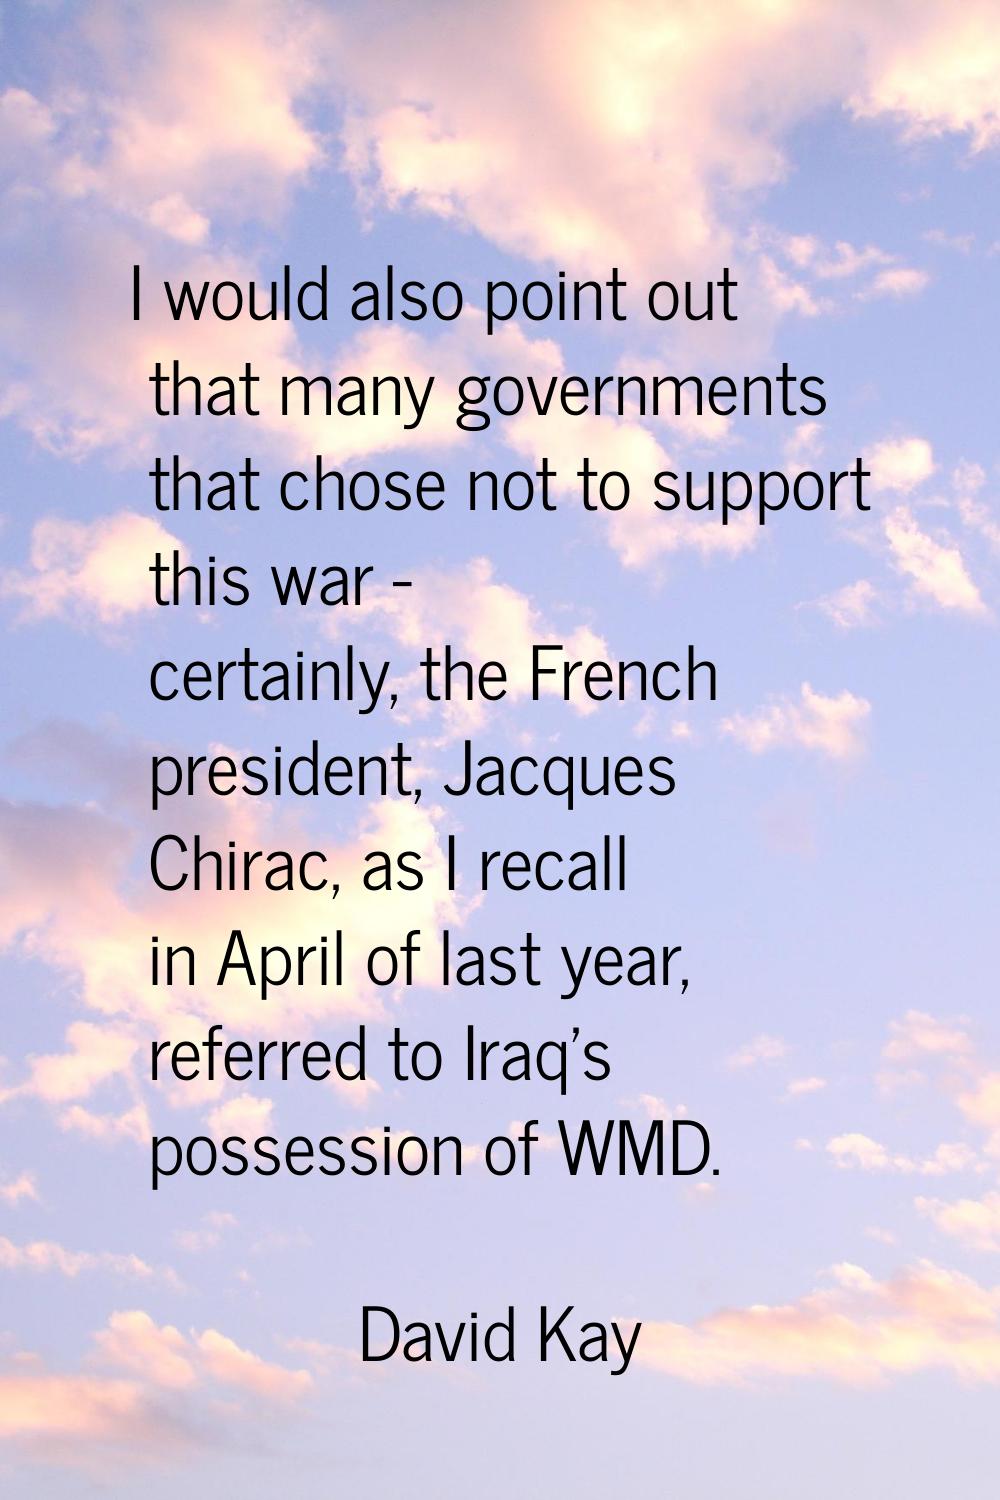 I would also point out that many governments that chose not to support this war - certainly, the Fr